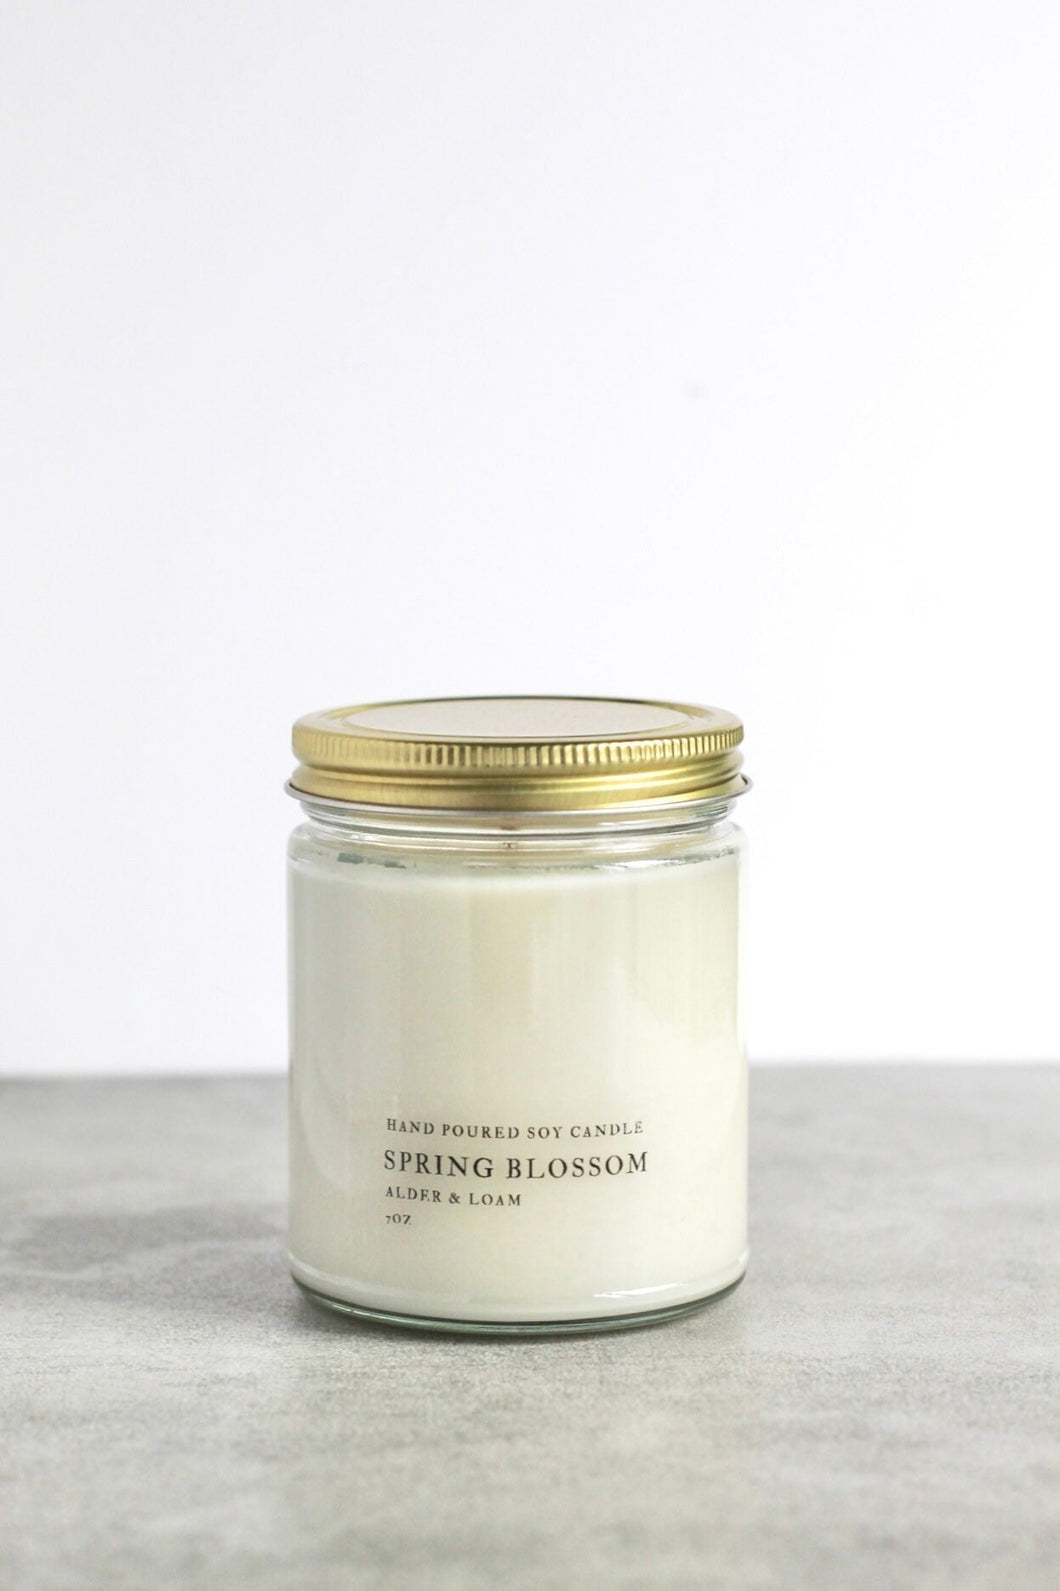 Spring Blossom Soy Candle, Hand Poured, Natural, Eco Friendly, Floral Spring Scent, 7 oz Jar